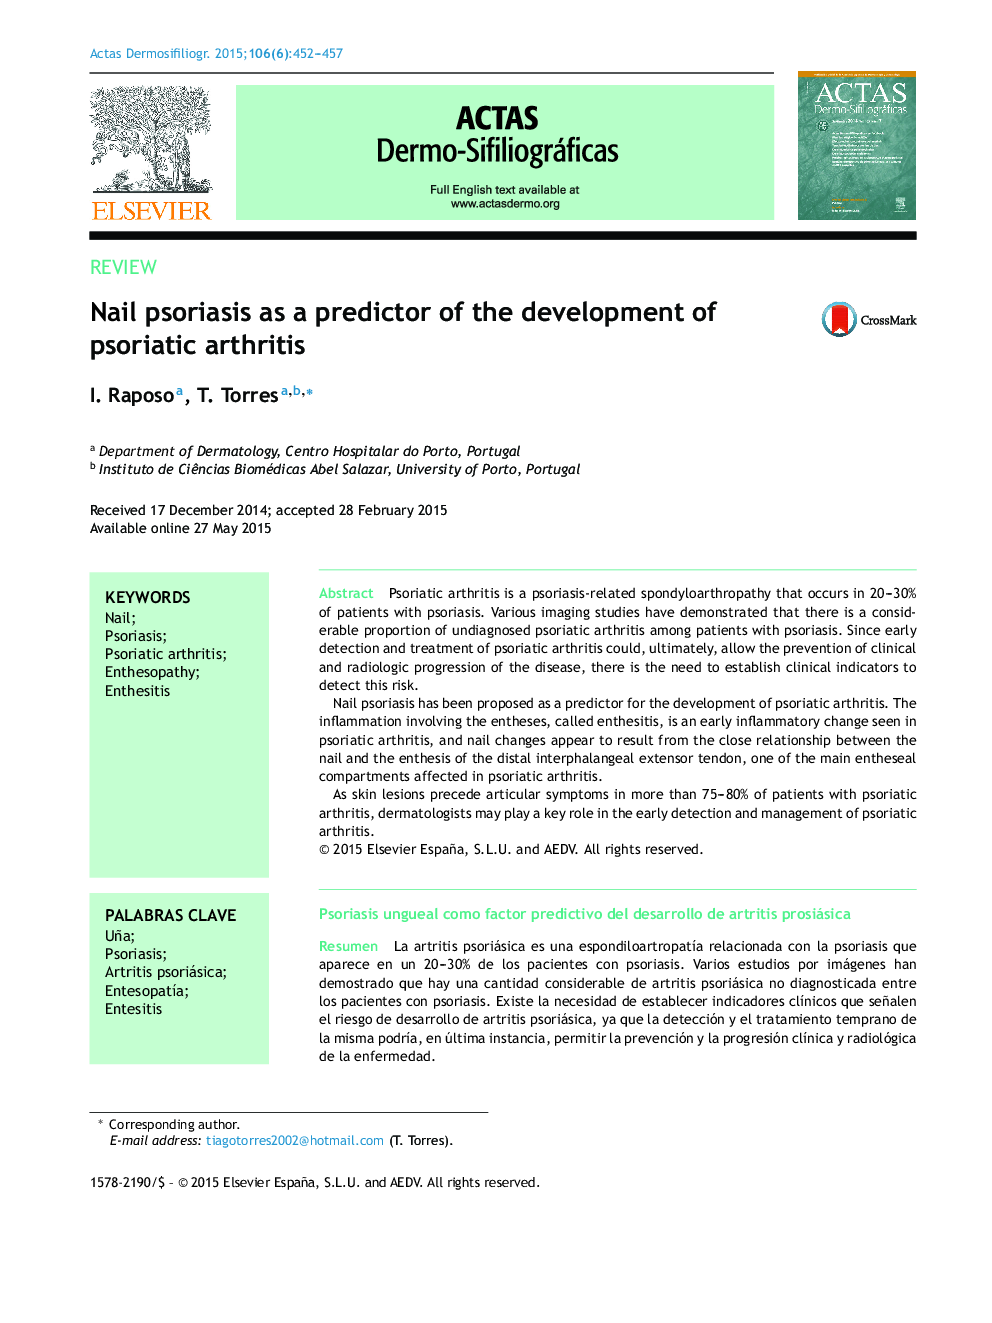 Nail psoriasis as a predictor of the development of psoriatic arthritis